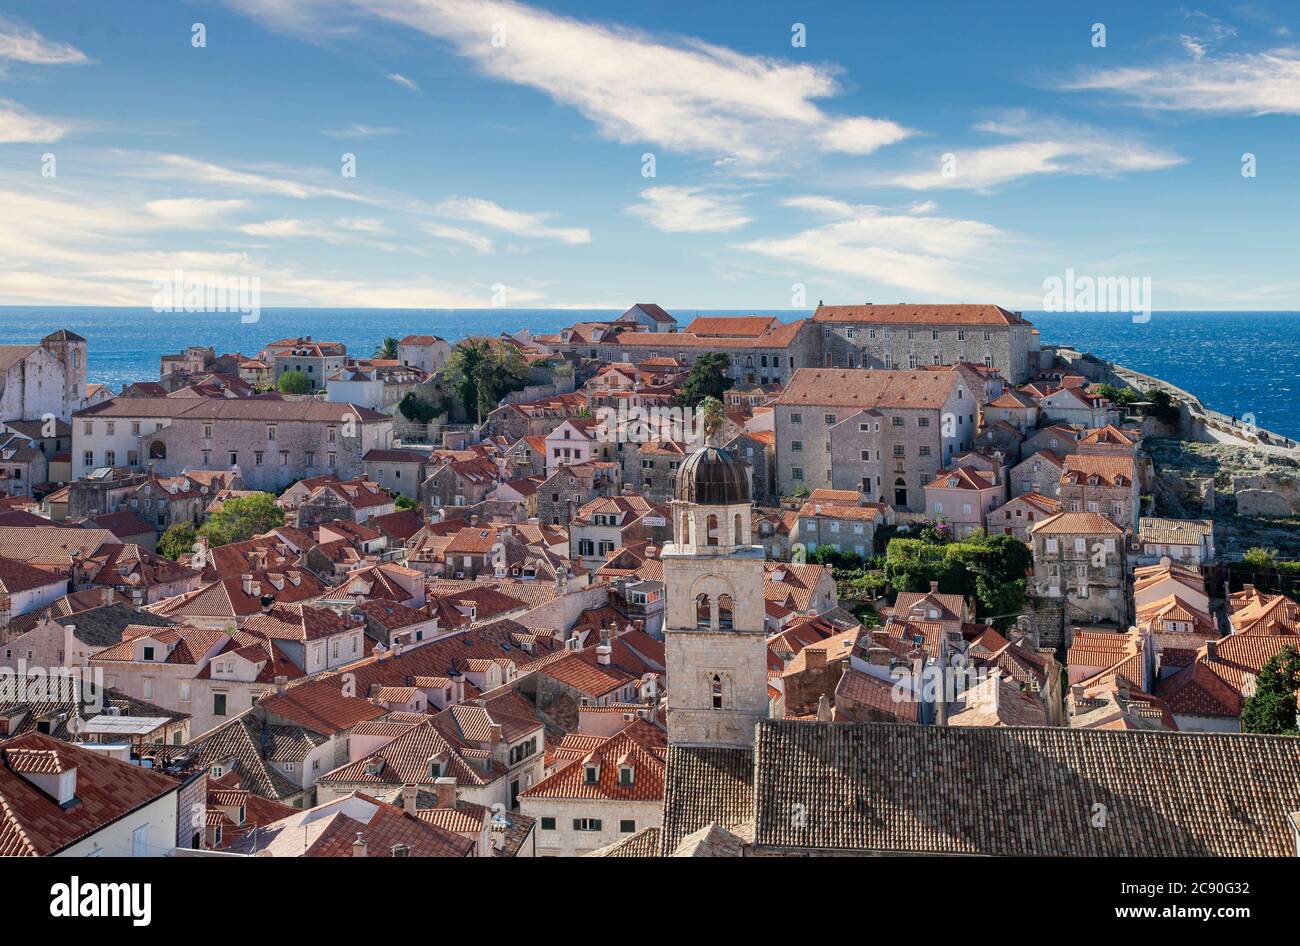 Croatia, Dubrovnik, Elevated view of old town Stock Photo